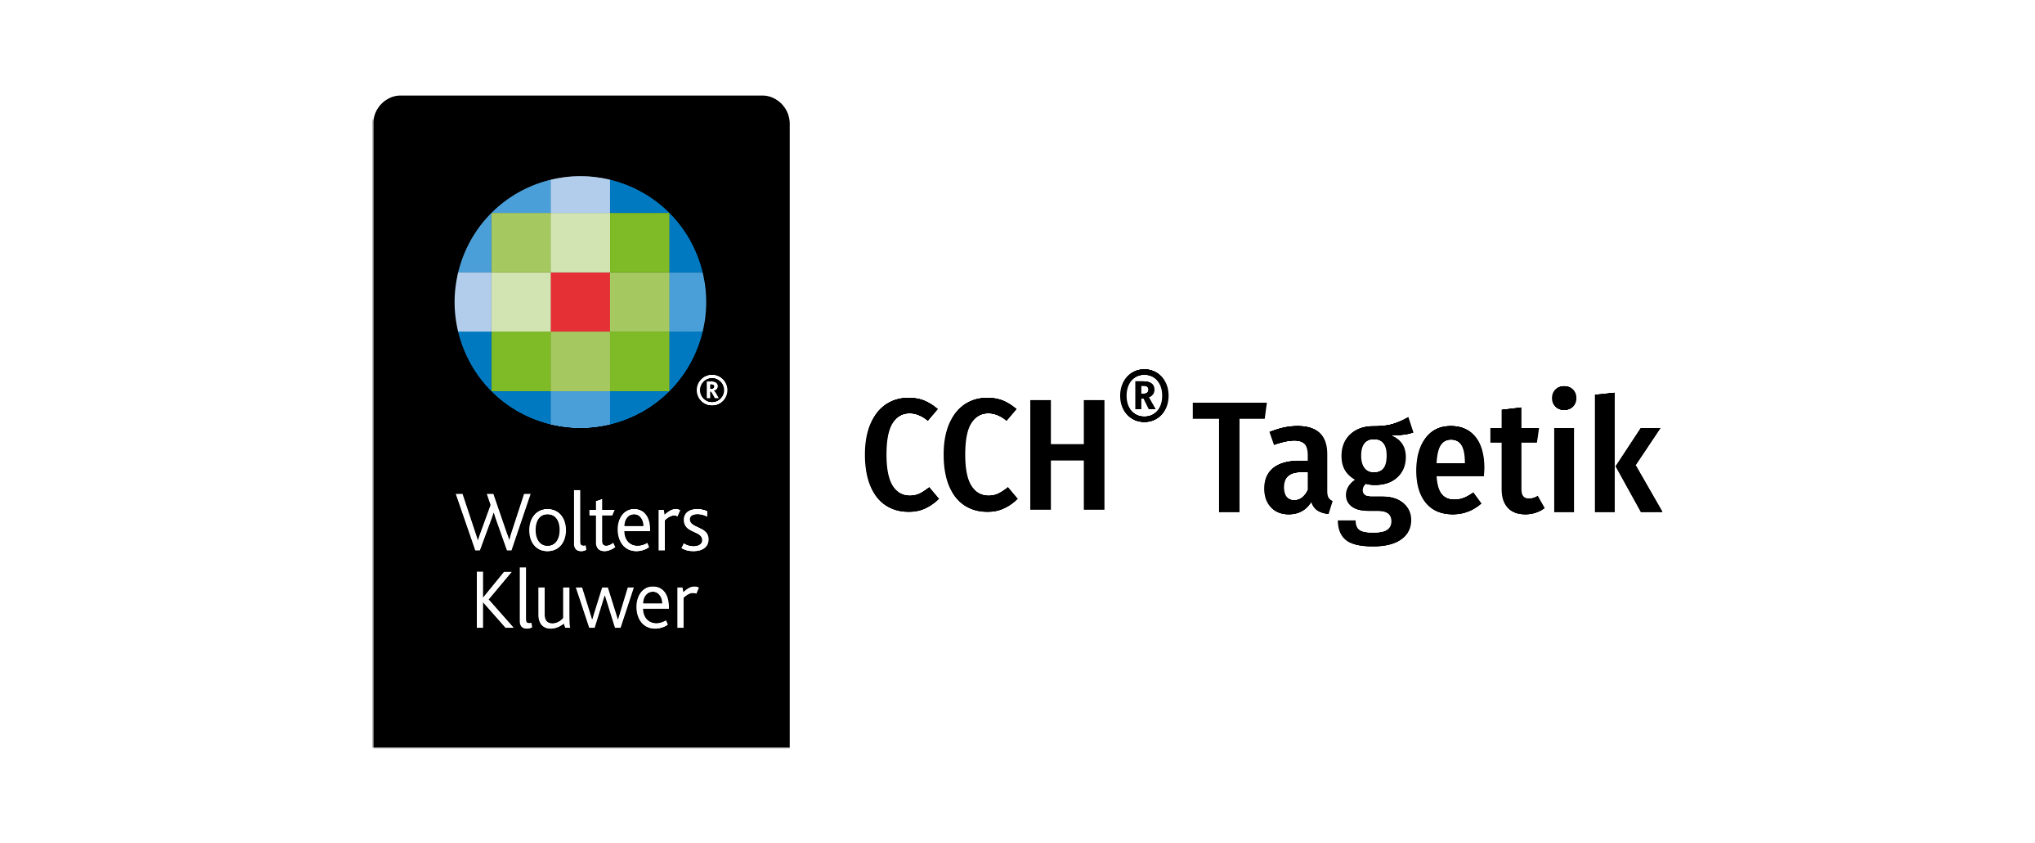 Wolters Kluwer - CCH Tagetik